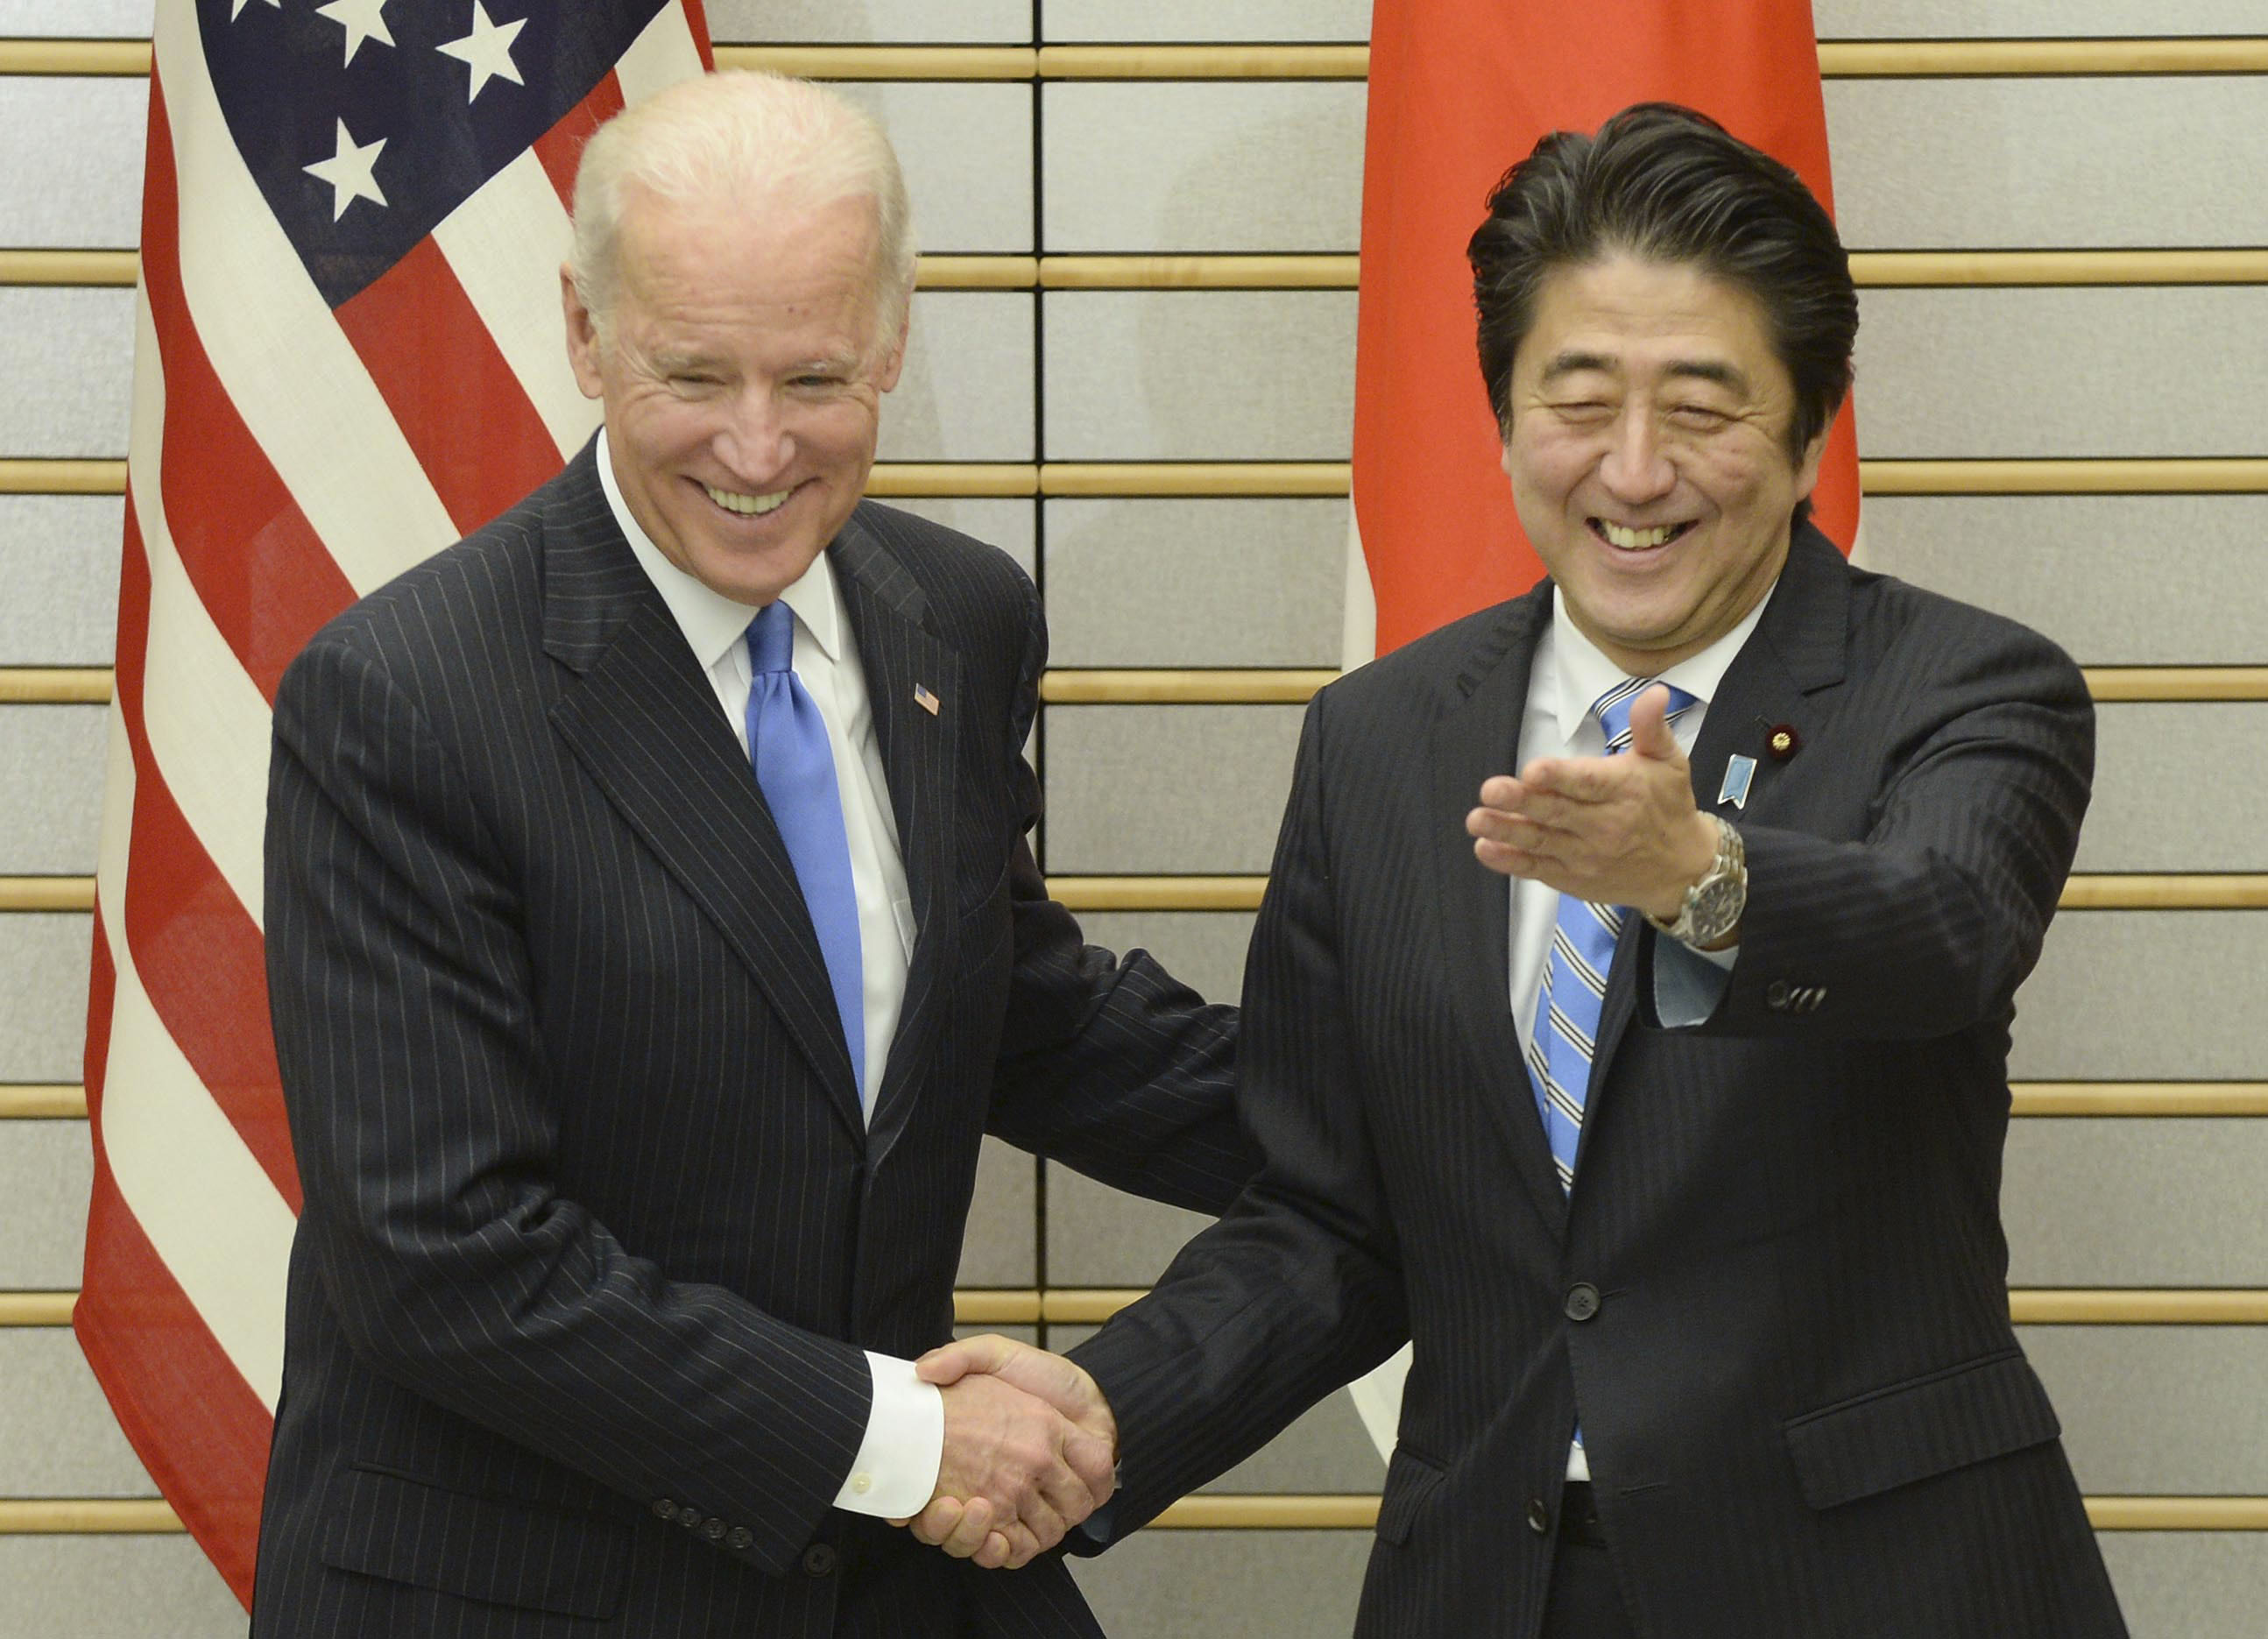 In the zone: U.S. Vice President Joe Biden is welcomed by Prime Minister Shinzo Abe at the prime minister's office Tuesday. | AP/POOL